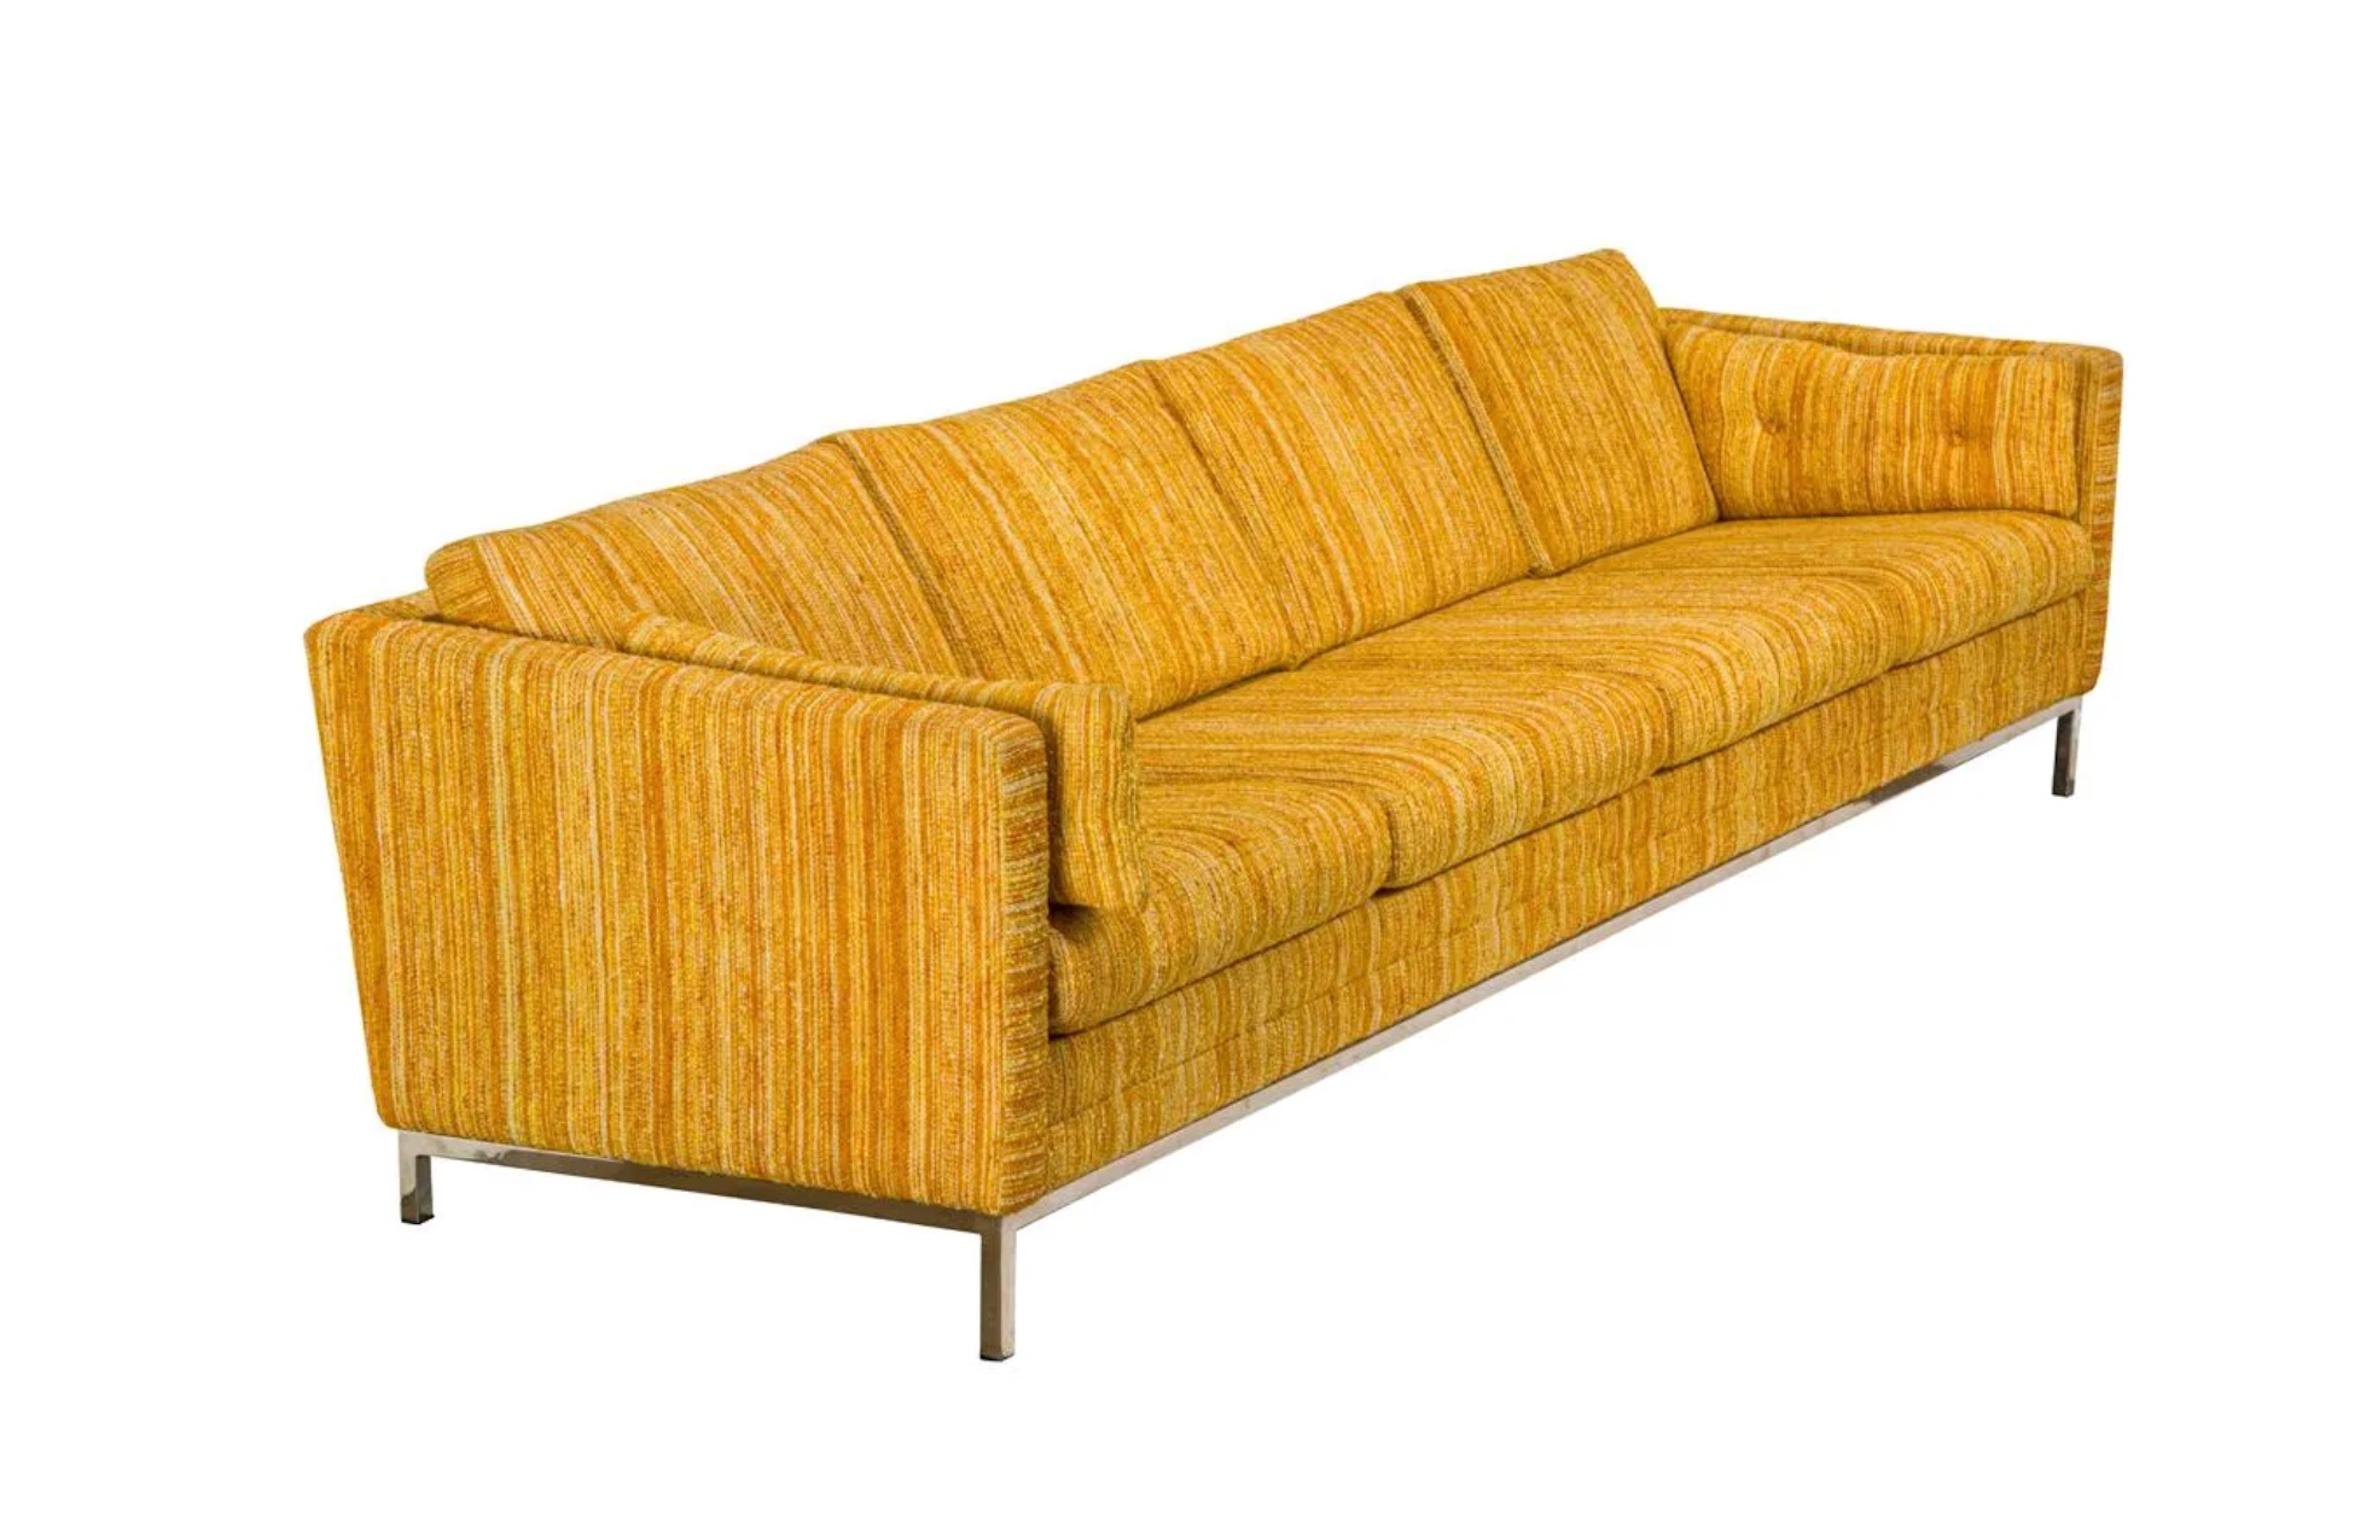 Midcentury Scandinavian Modern long low 4 seat low sofa couch by DUX in original Yellow woven tweed upholstery with chrome steel legs. All Original 1970s Upholstery in beautiful vintage condition. Wonderful design and very comfortable. Shows very